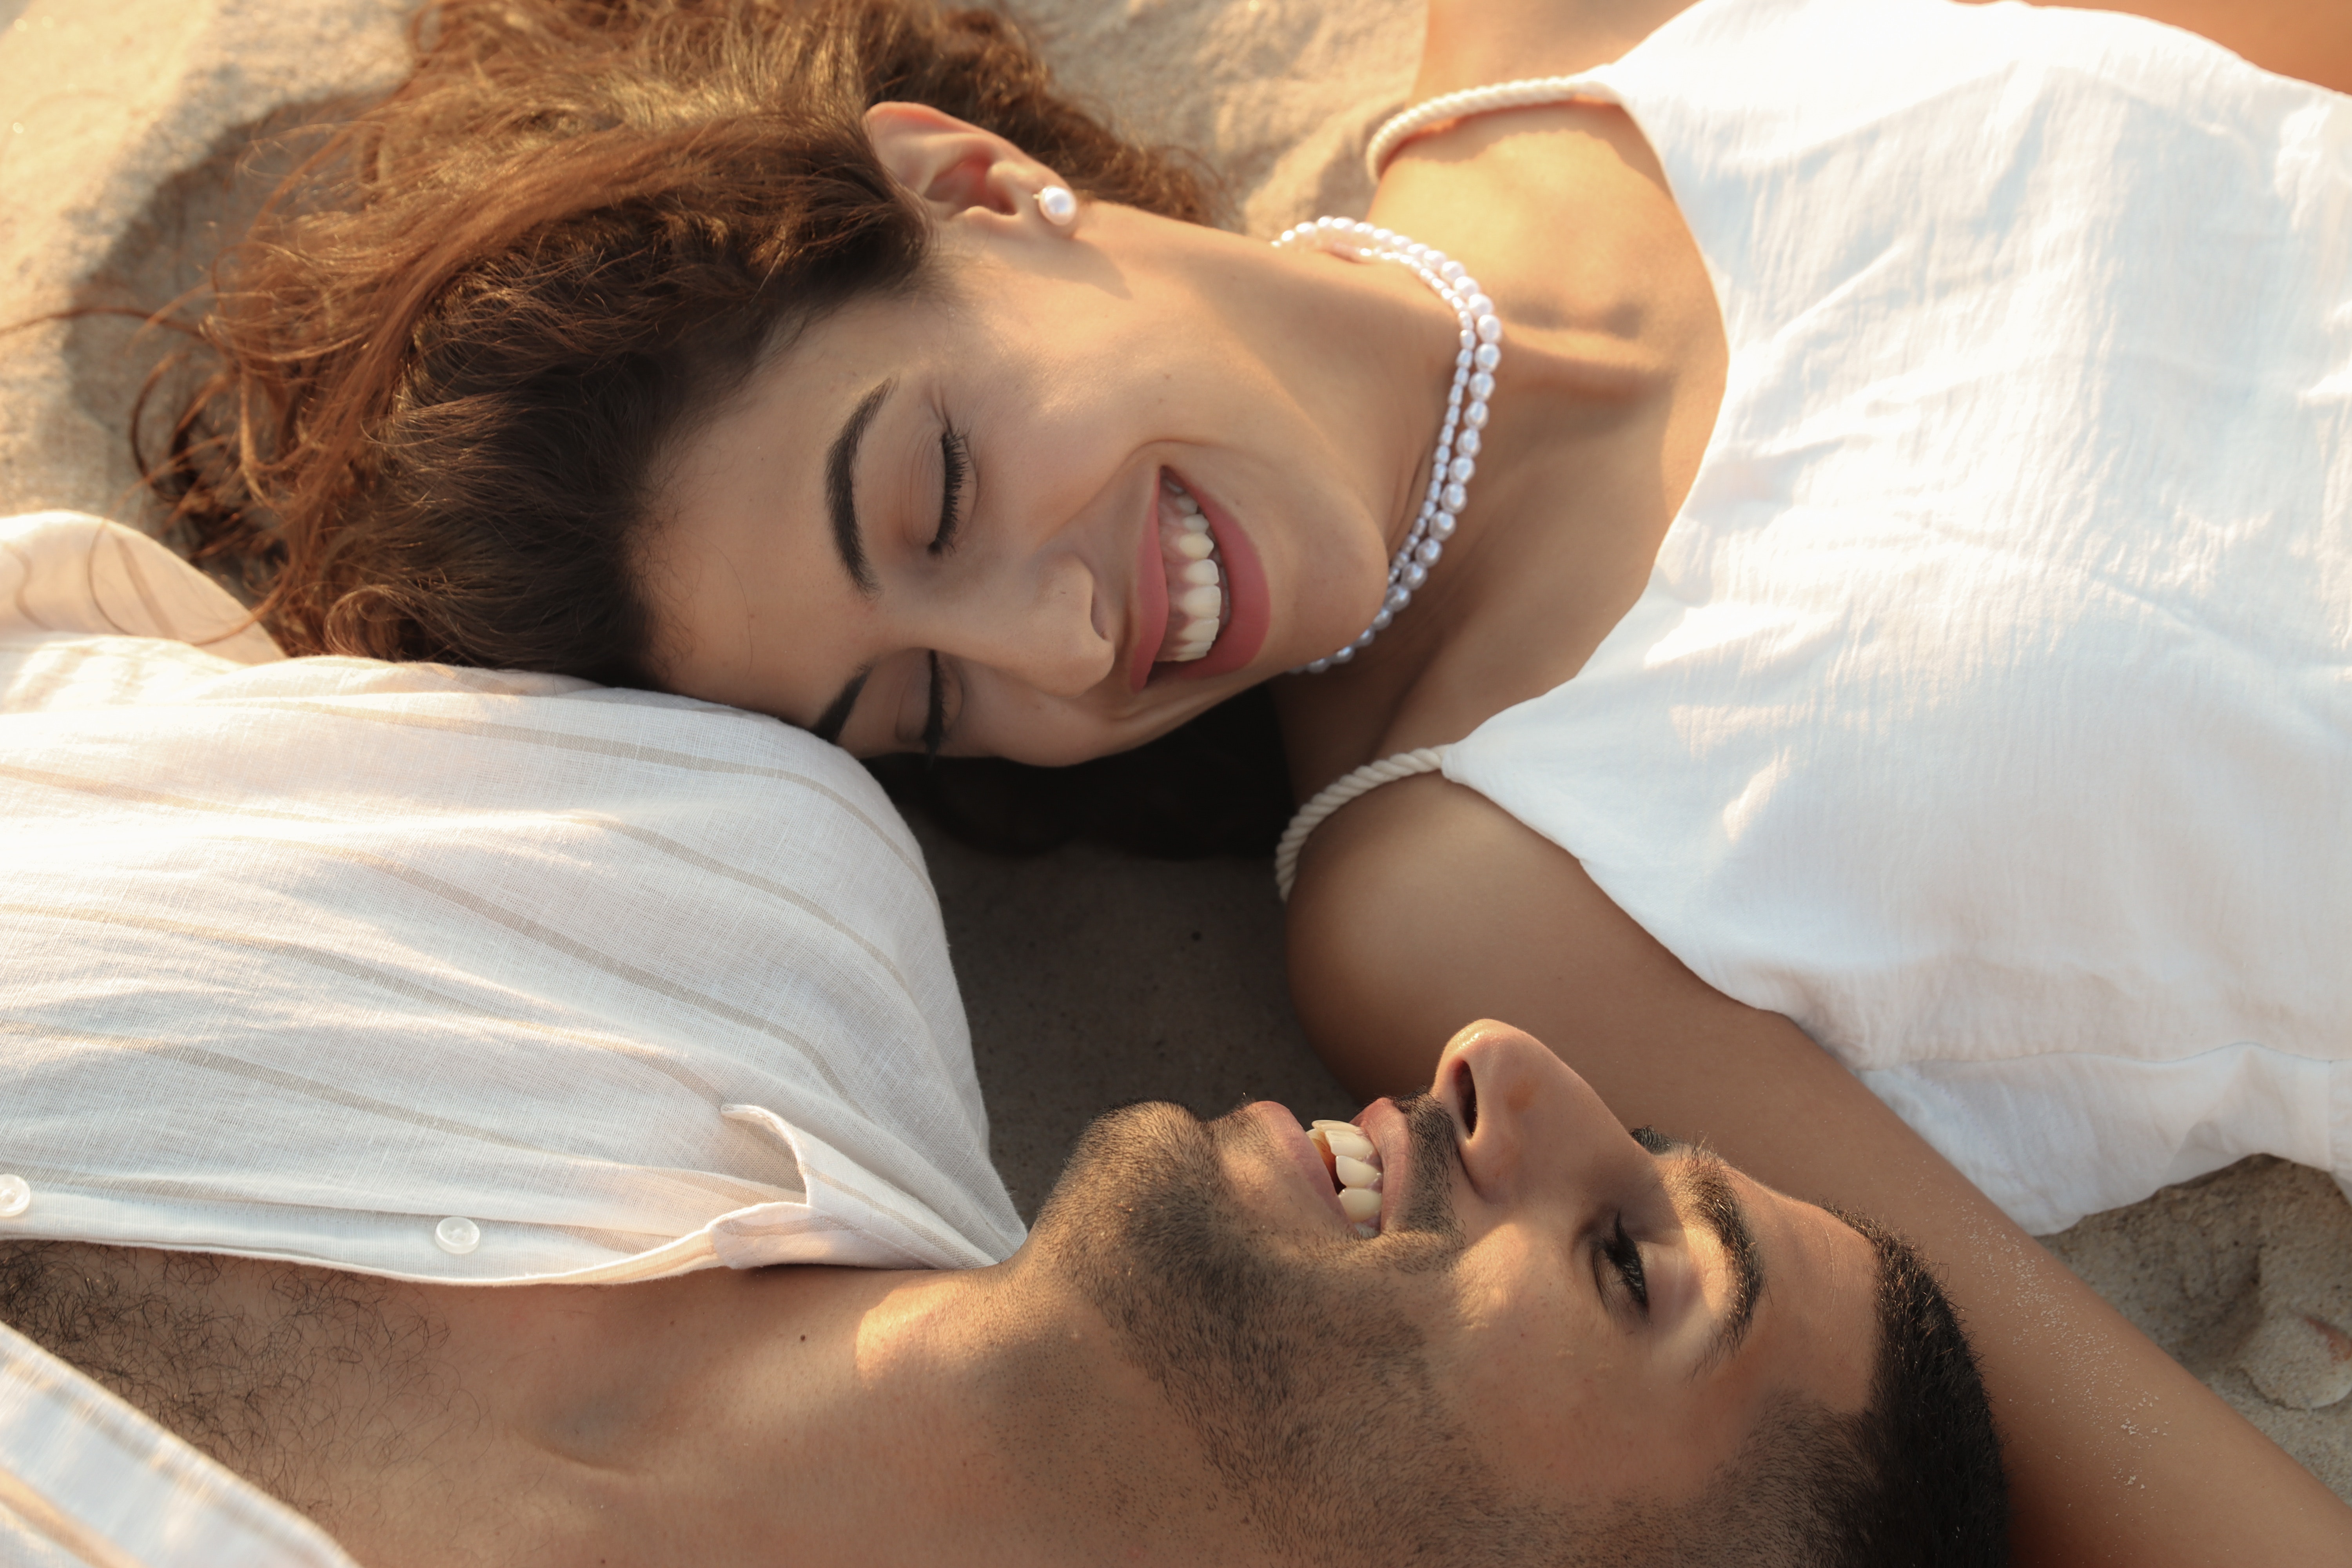 Smiling Couple Lying Down Together. | Source: Pexels